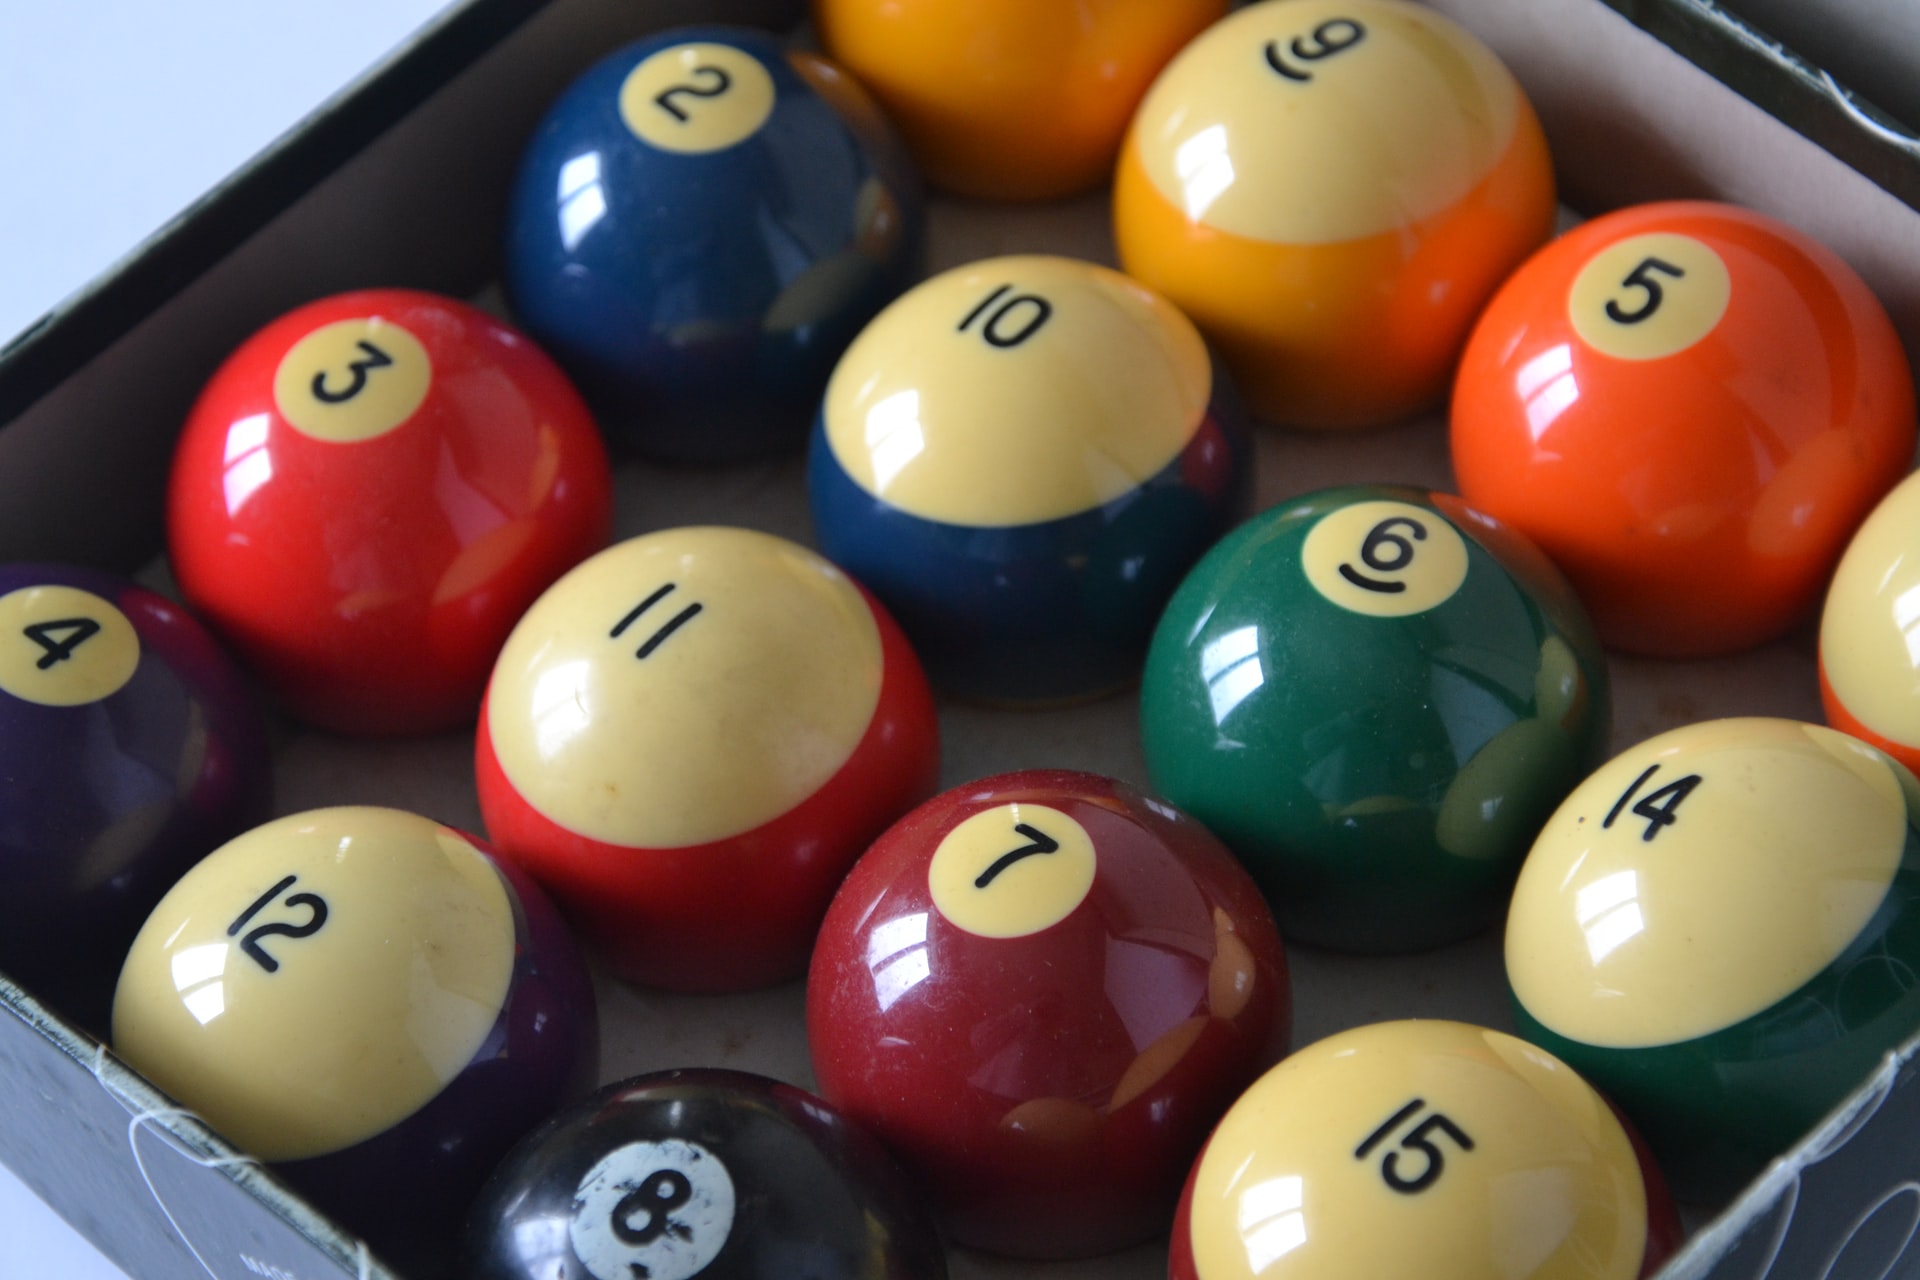 What are the parts of a pool table called?